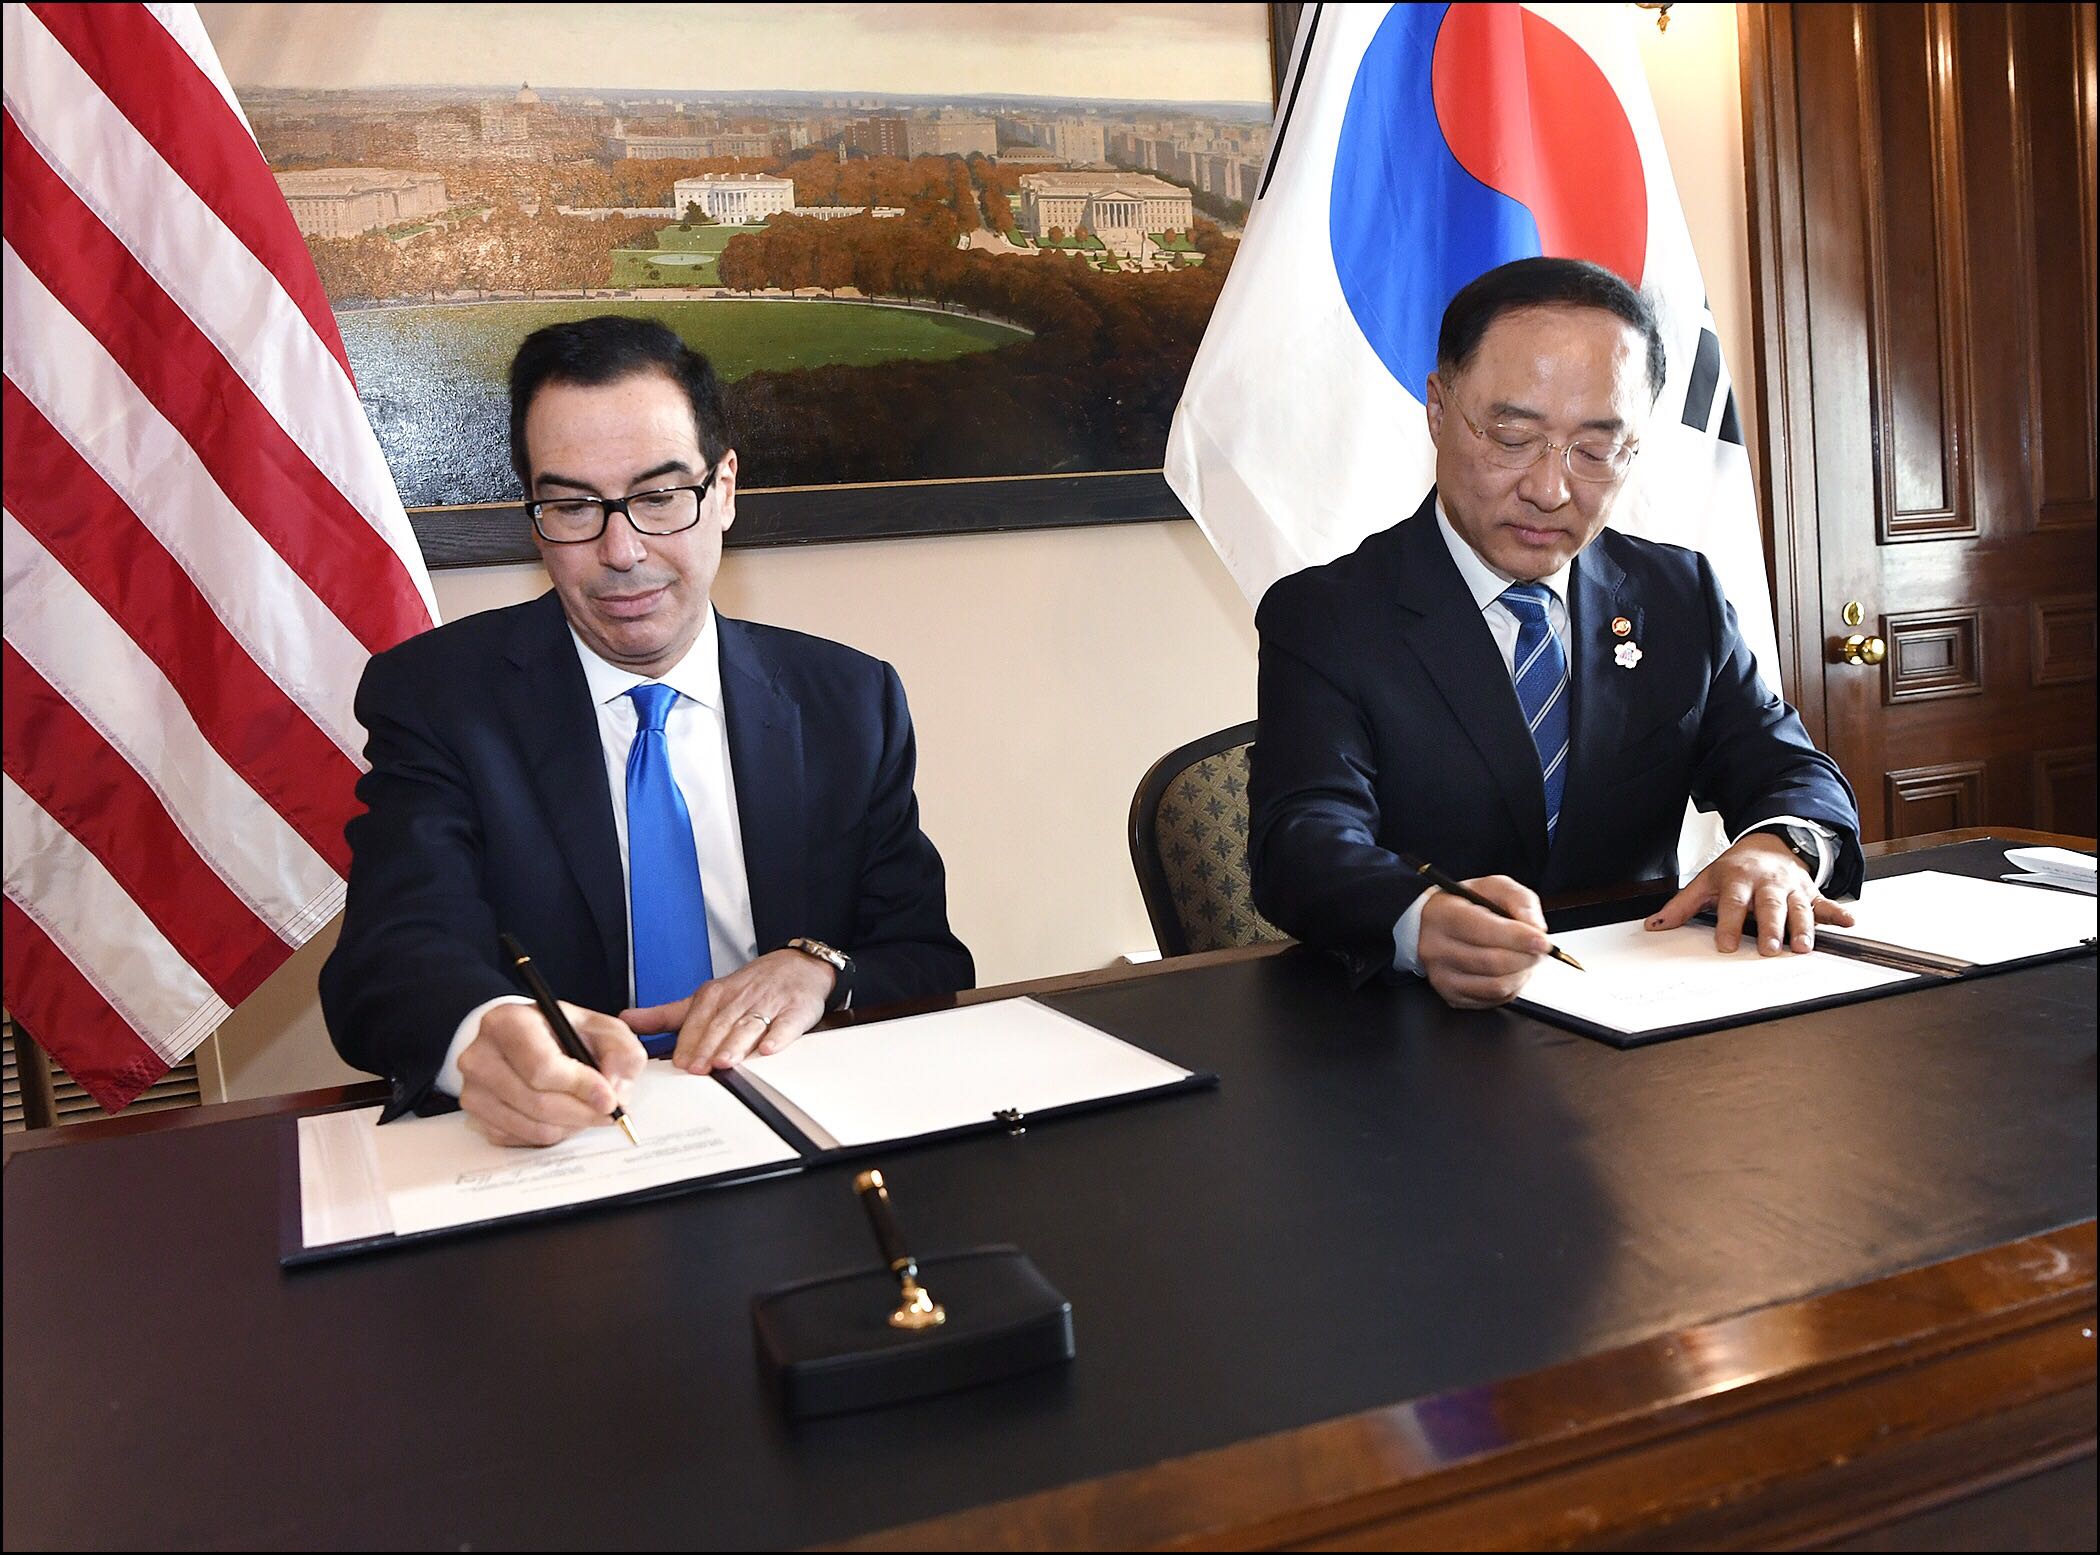 U.S. Secretary of the Treasury Steven T. Mnuchin and Korean Deputy Prime Minister and Finance Minister Hong Nam-ki sign a Memorandum of Understanding to Strengthen Infrastructure Finance and Market Building Cooperation. Photo credit: U.S. Department of the Treasury, October 17, 2019